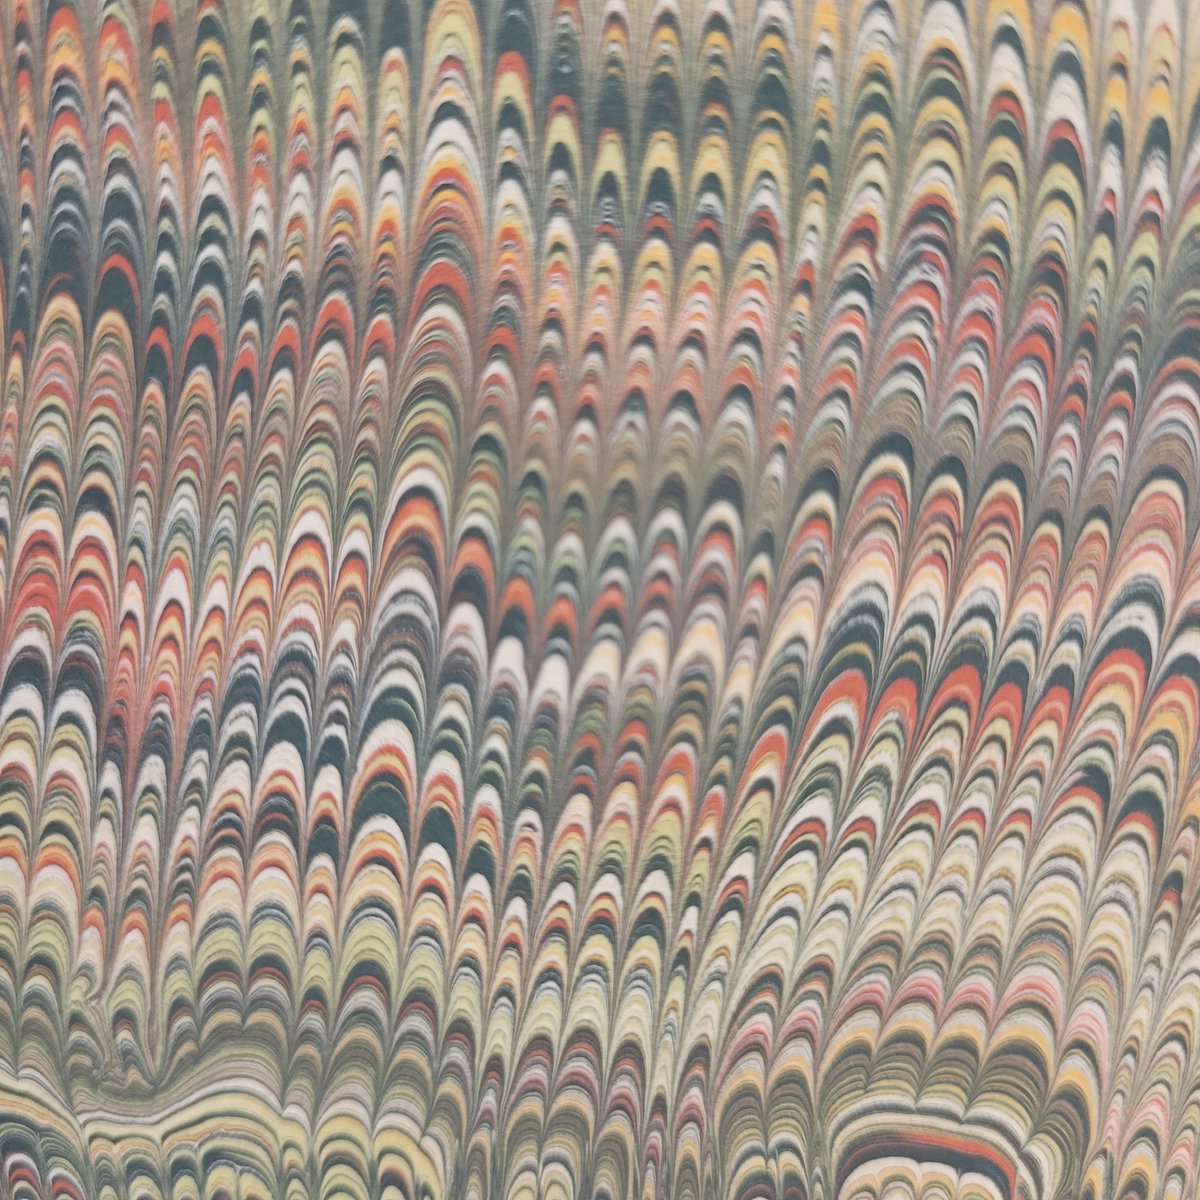 Happy #MarbledMonday! This modern double comb pattern is from our 1735 edition of An Essay on Reason.